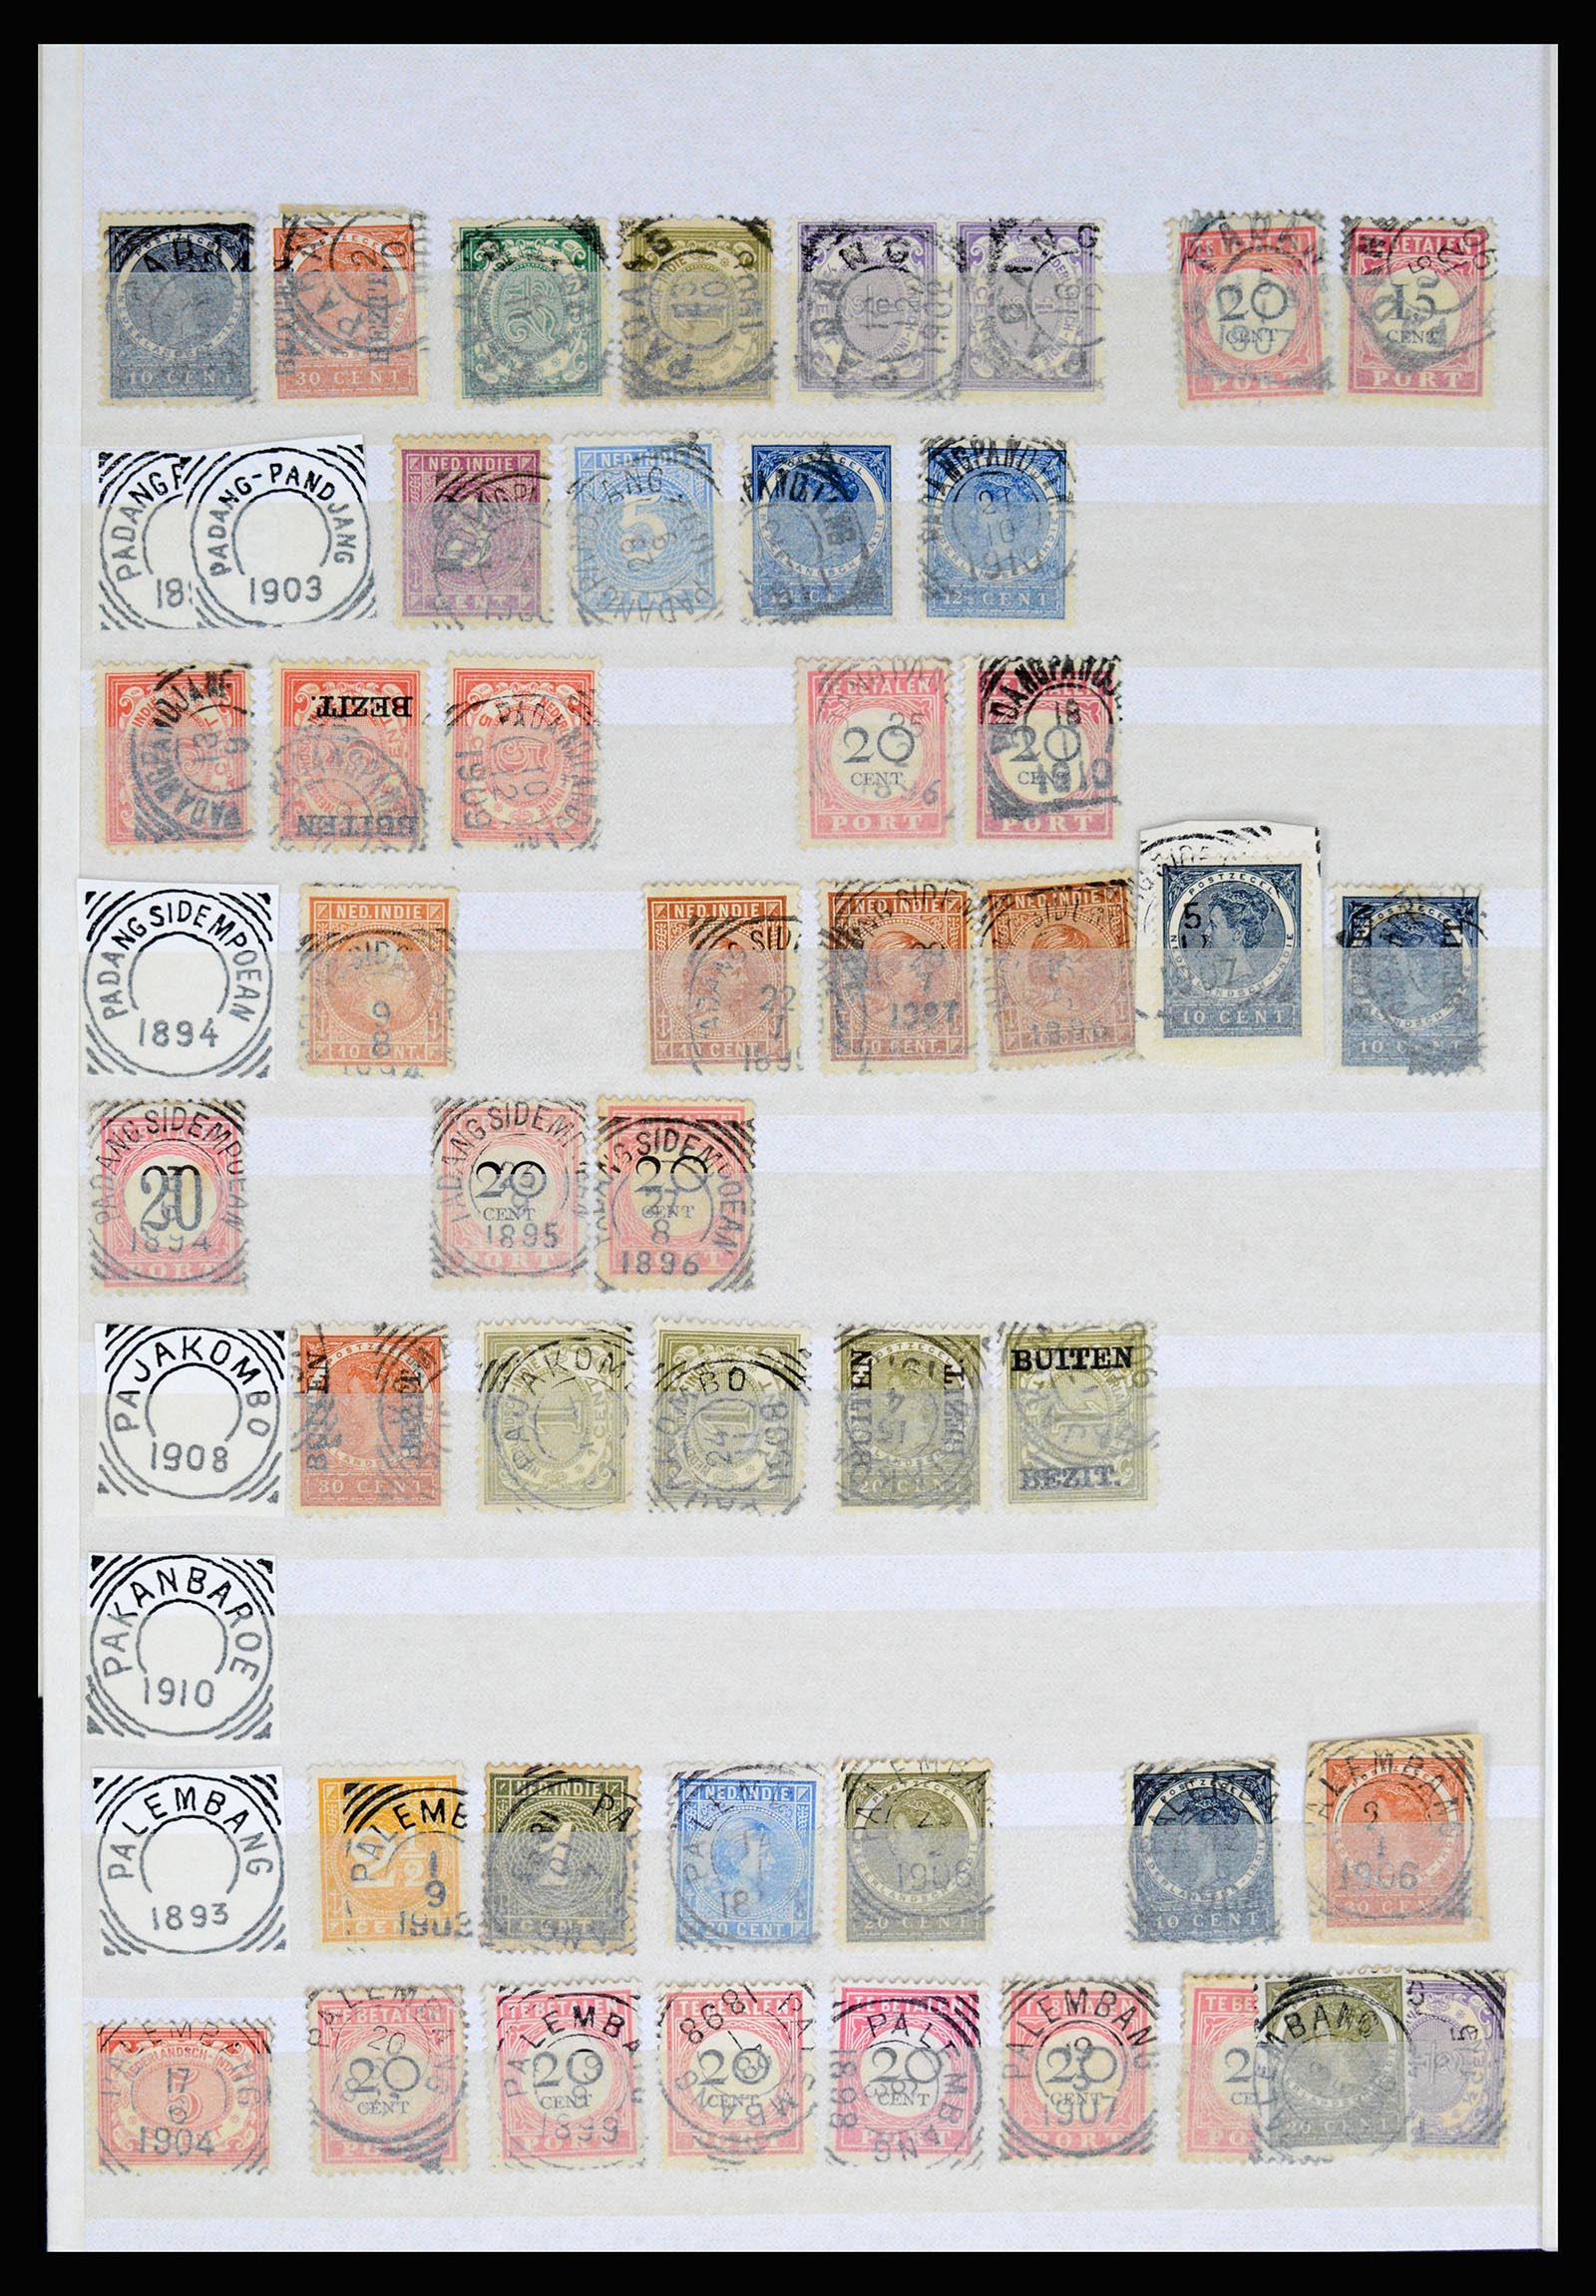 36839 081 - Stamp collection 36839 Dutch east Indies square cancels.